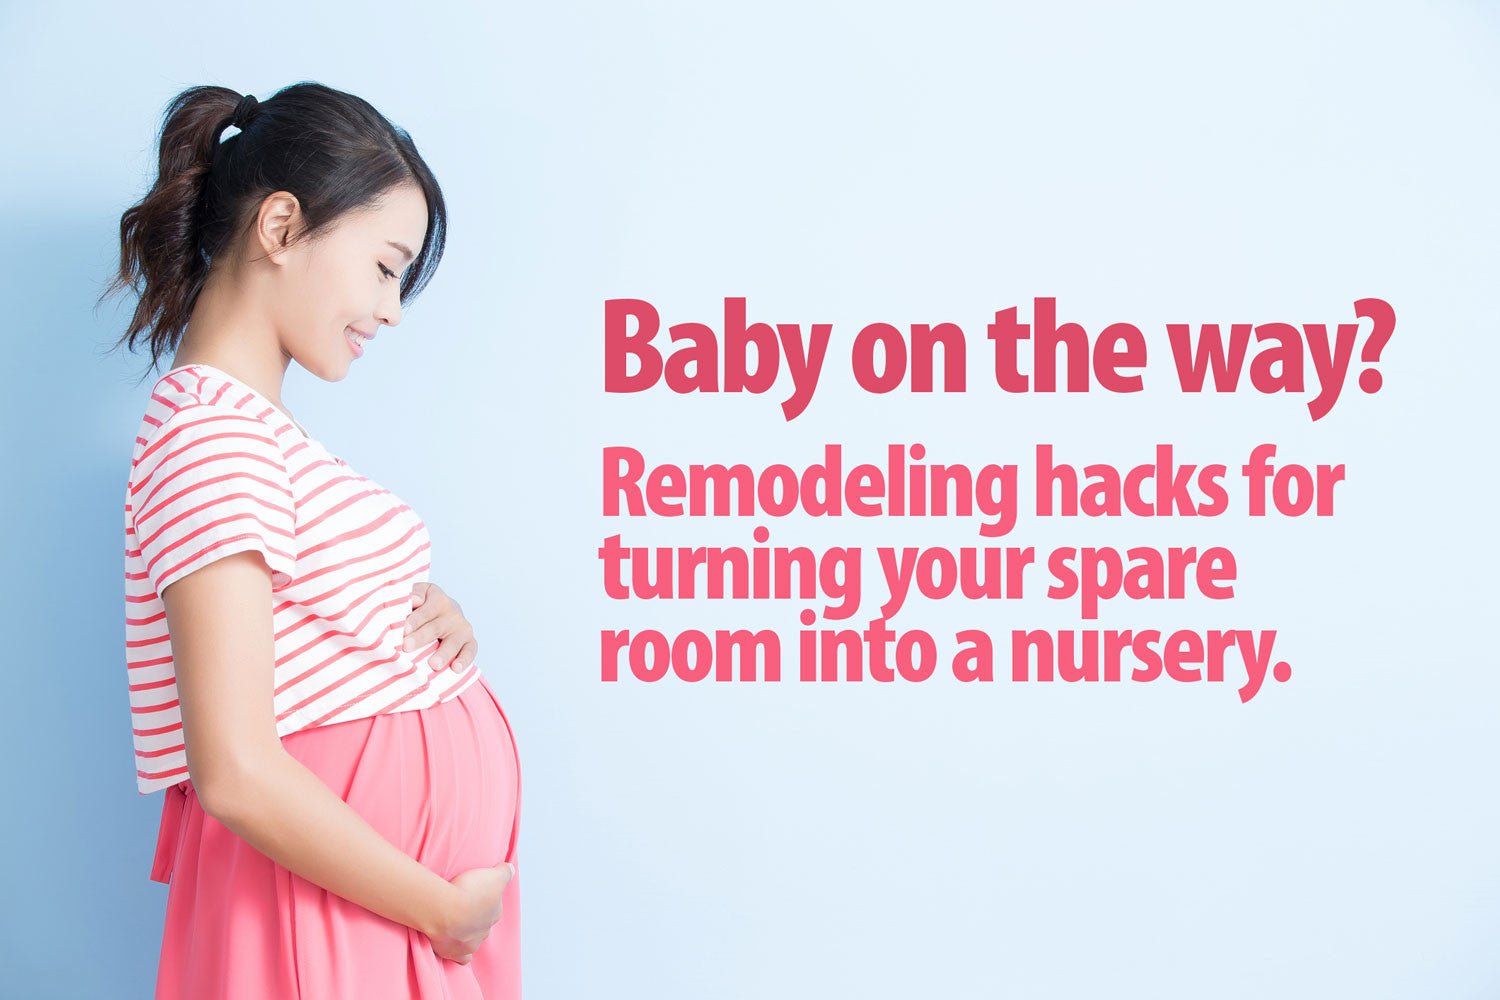 Remodeling Hacks for Turning Your Spare Room into a Nursery